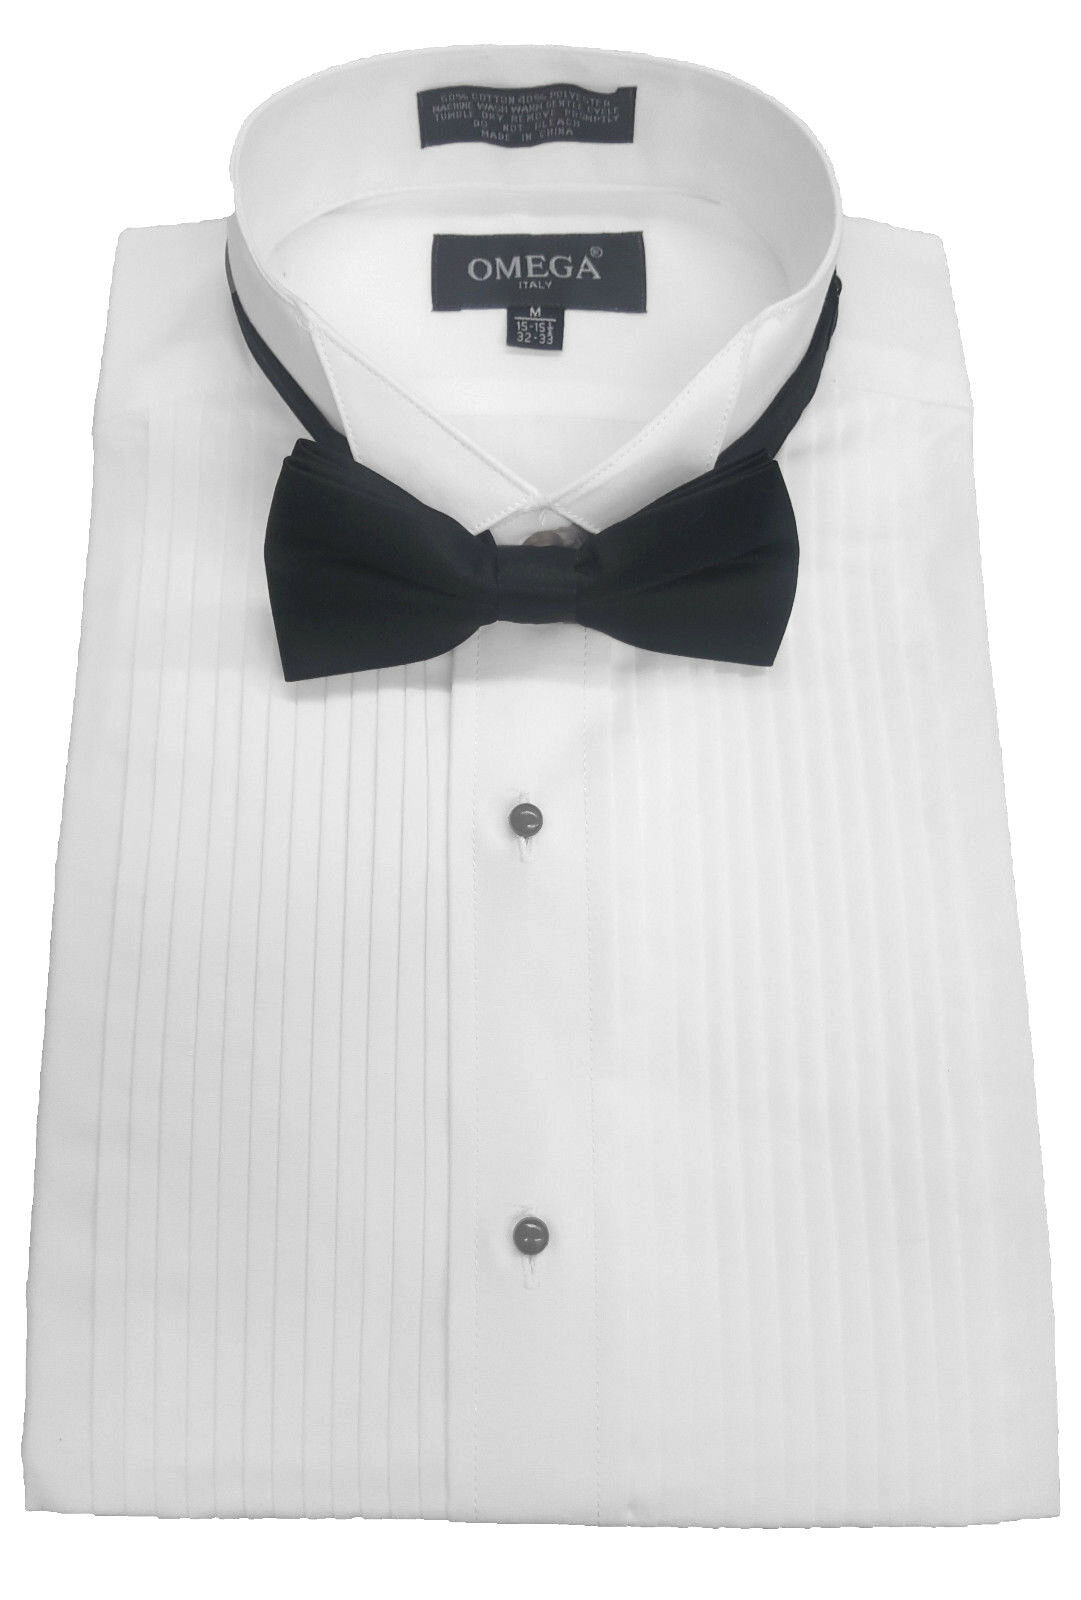 Mens Wing Collar Tuxedo Dress Shirt With A Bowtie, 1/4 Pleat